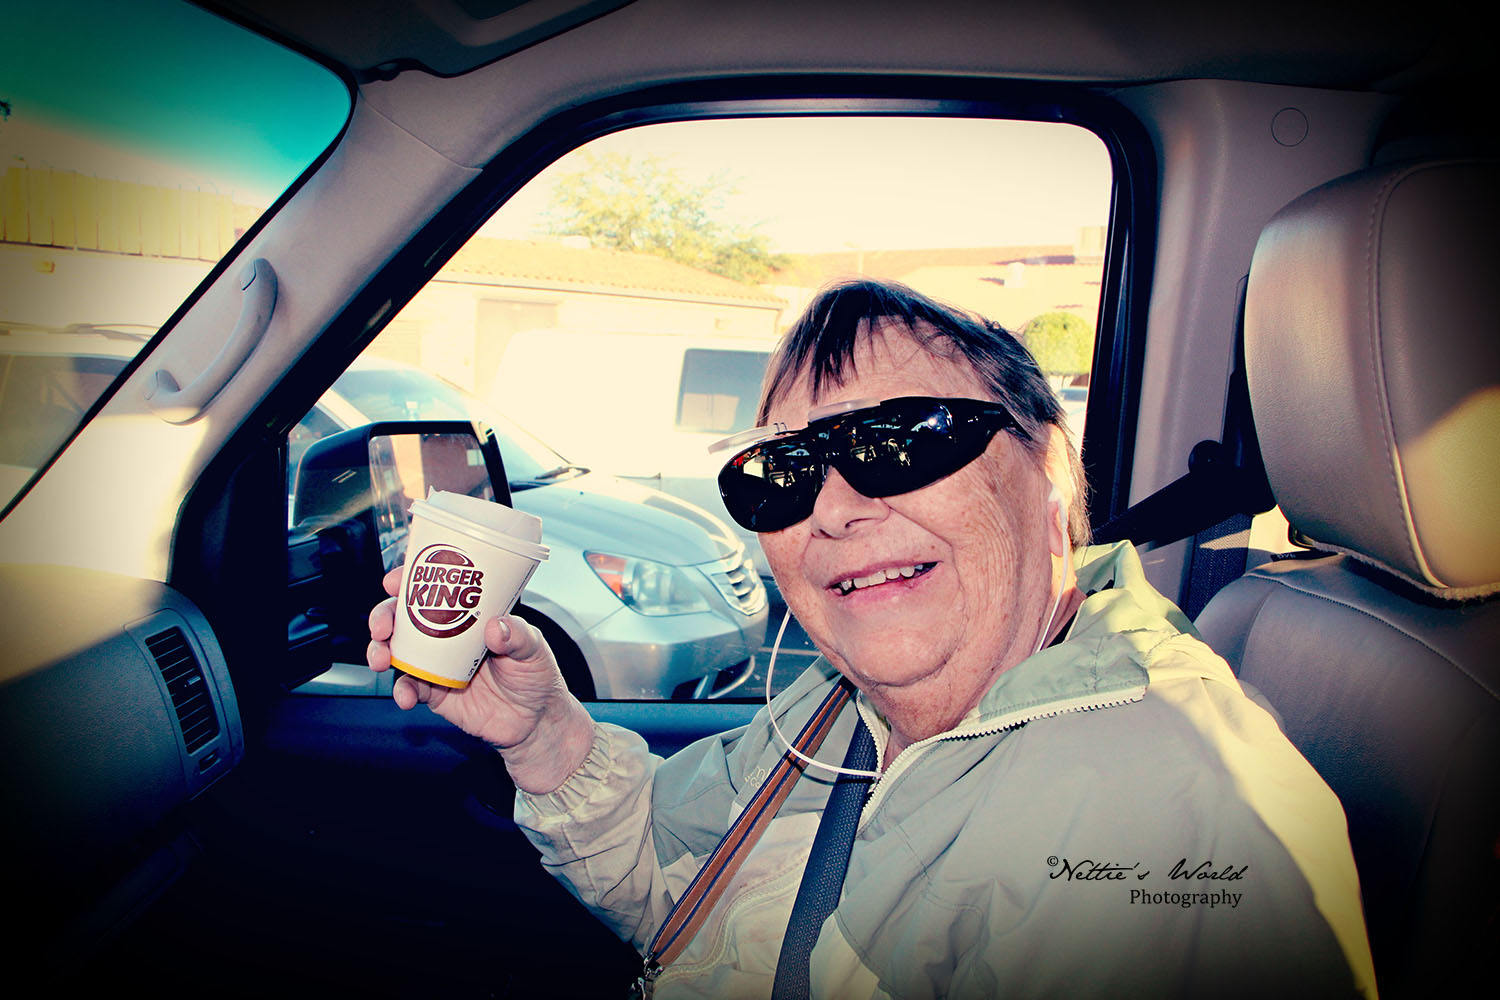 It was a brisk 48 degrees on Friday morning, and since we were early for the race, we spun through BK and got Oma a coffee to warm her up.